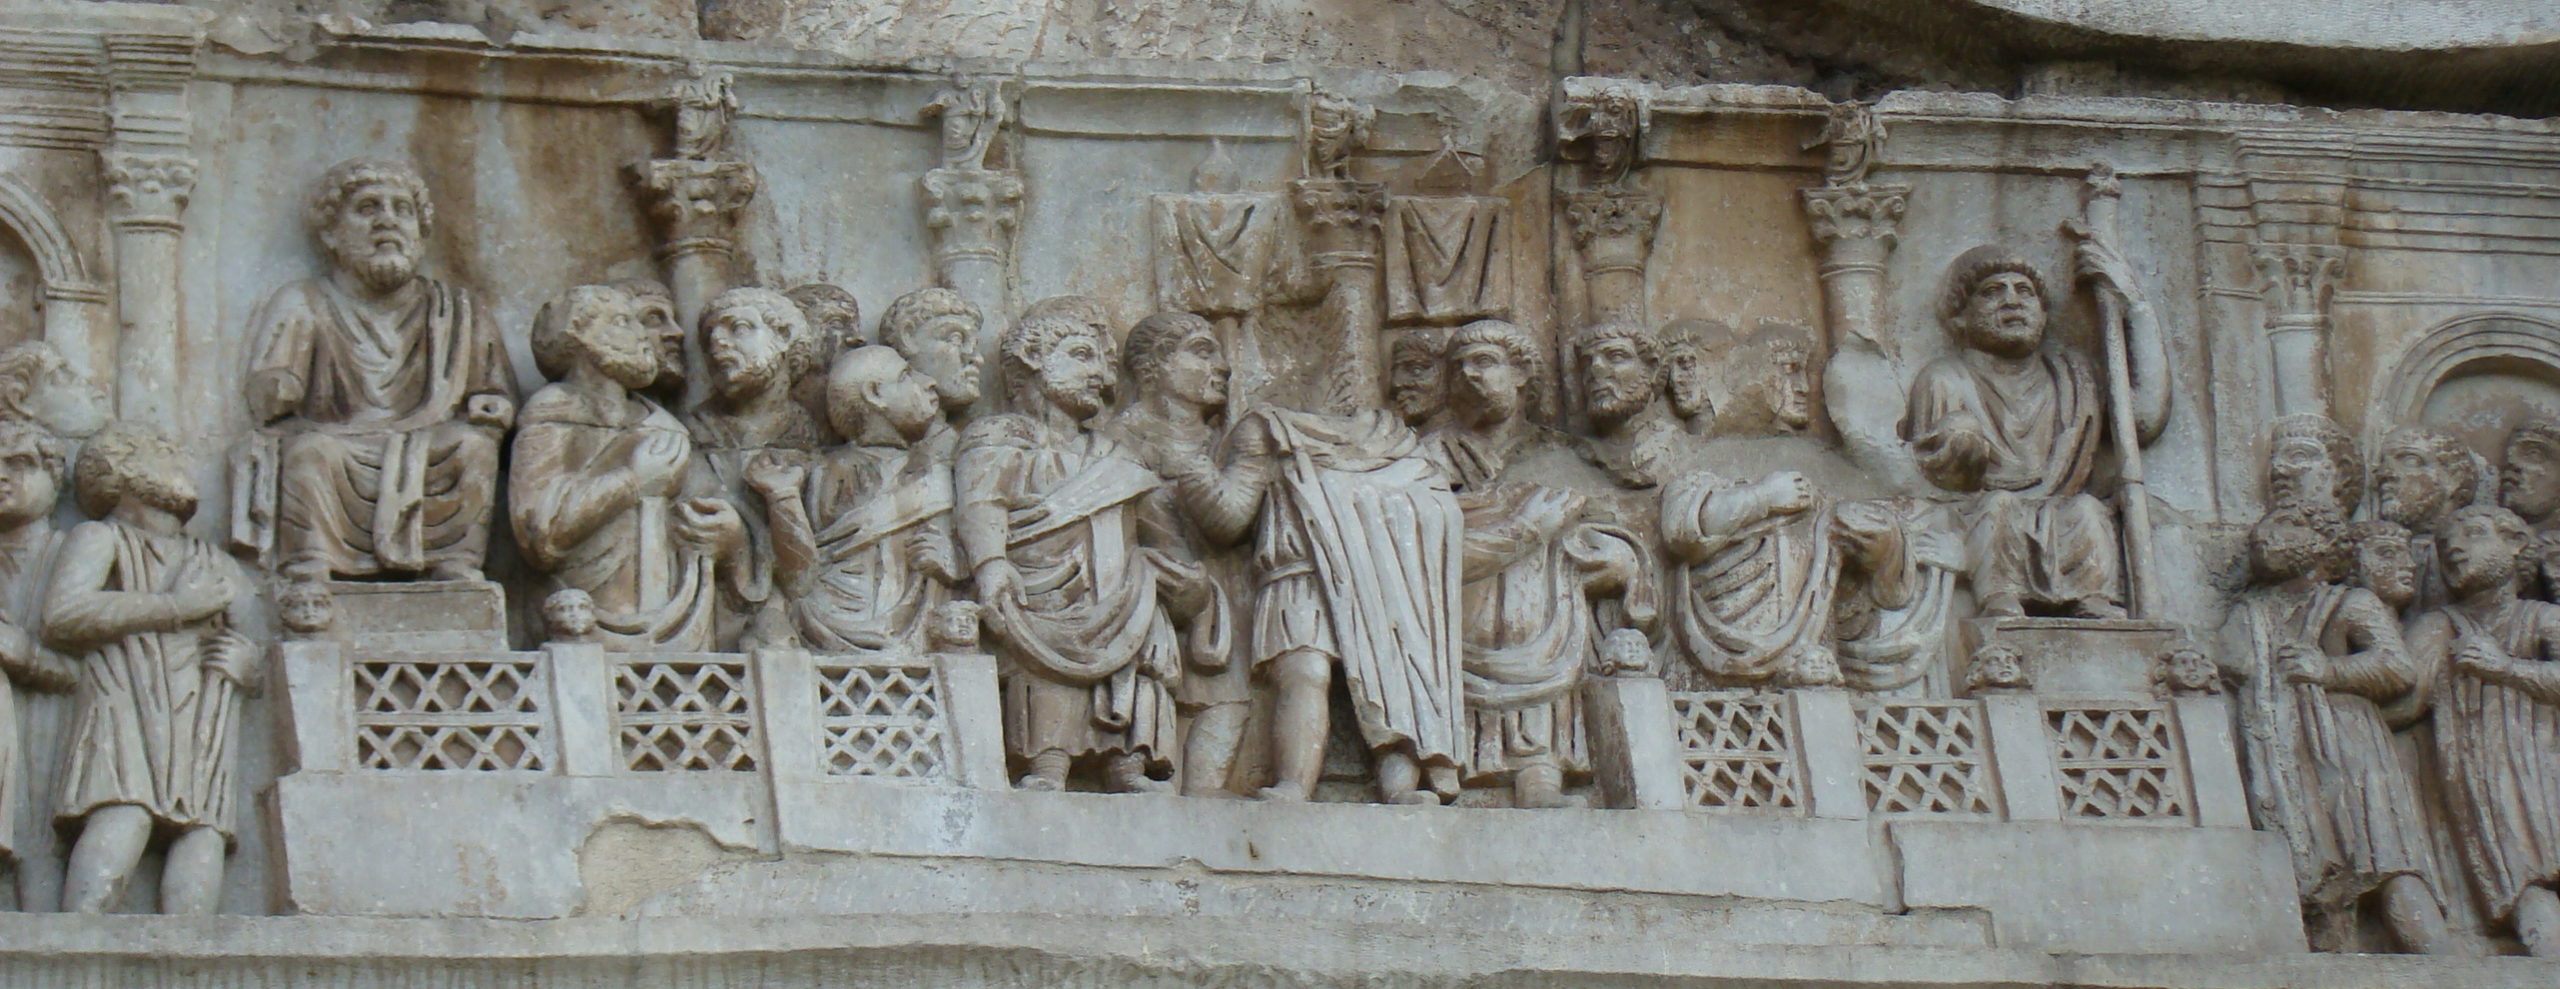 Relief from the Arch of Constantine, 315 C.E., Rome (photo: F. Tronchin, CC BY-NC-ND 2.0)